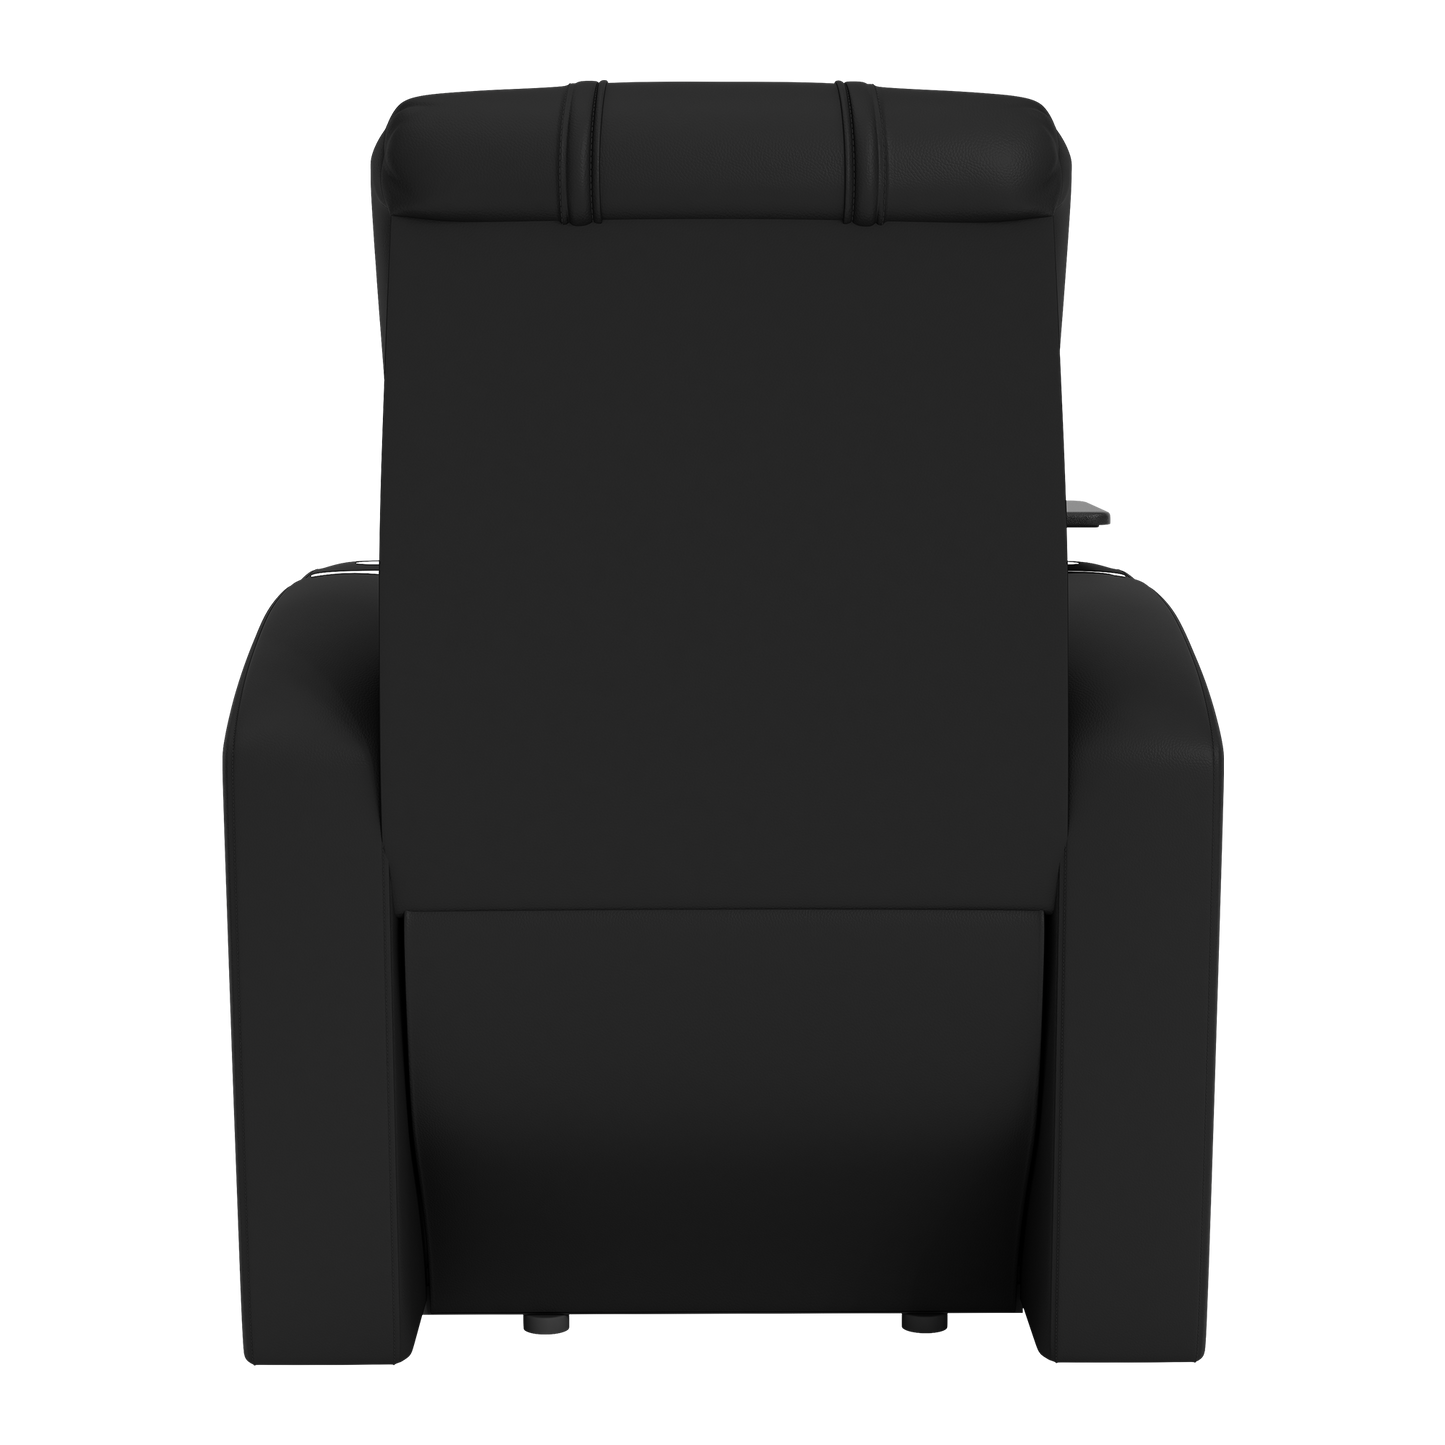 Stealth Power Plus Recliner with Sporting Kansas City Logo